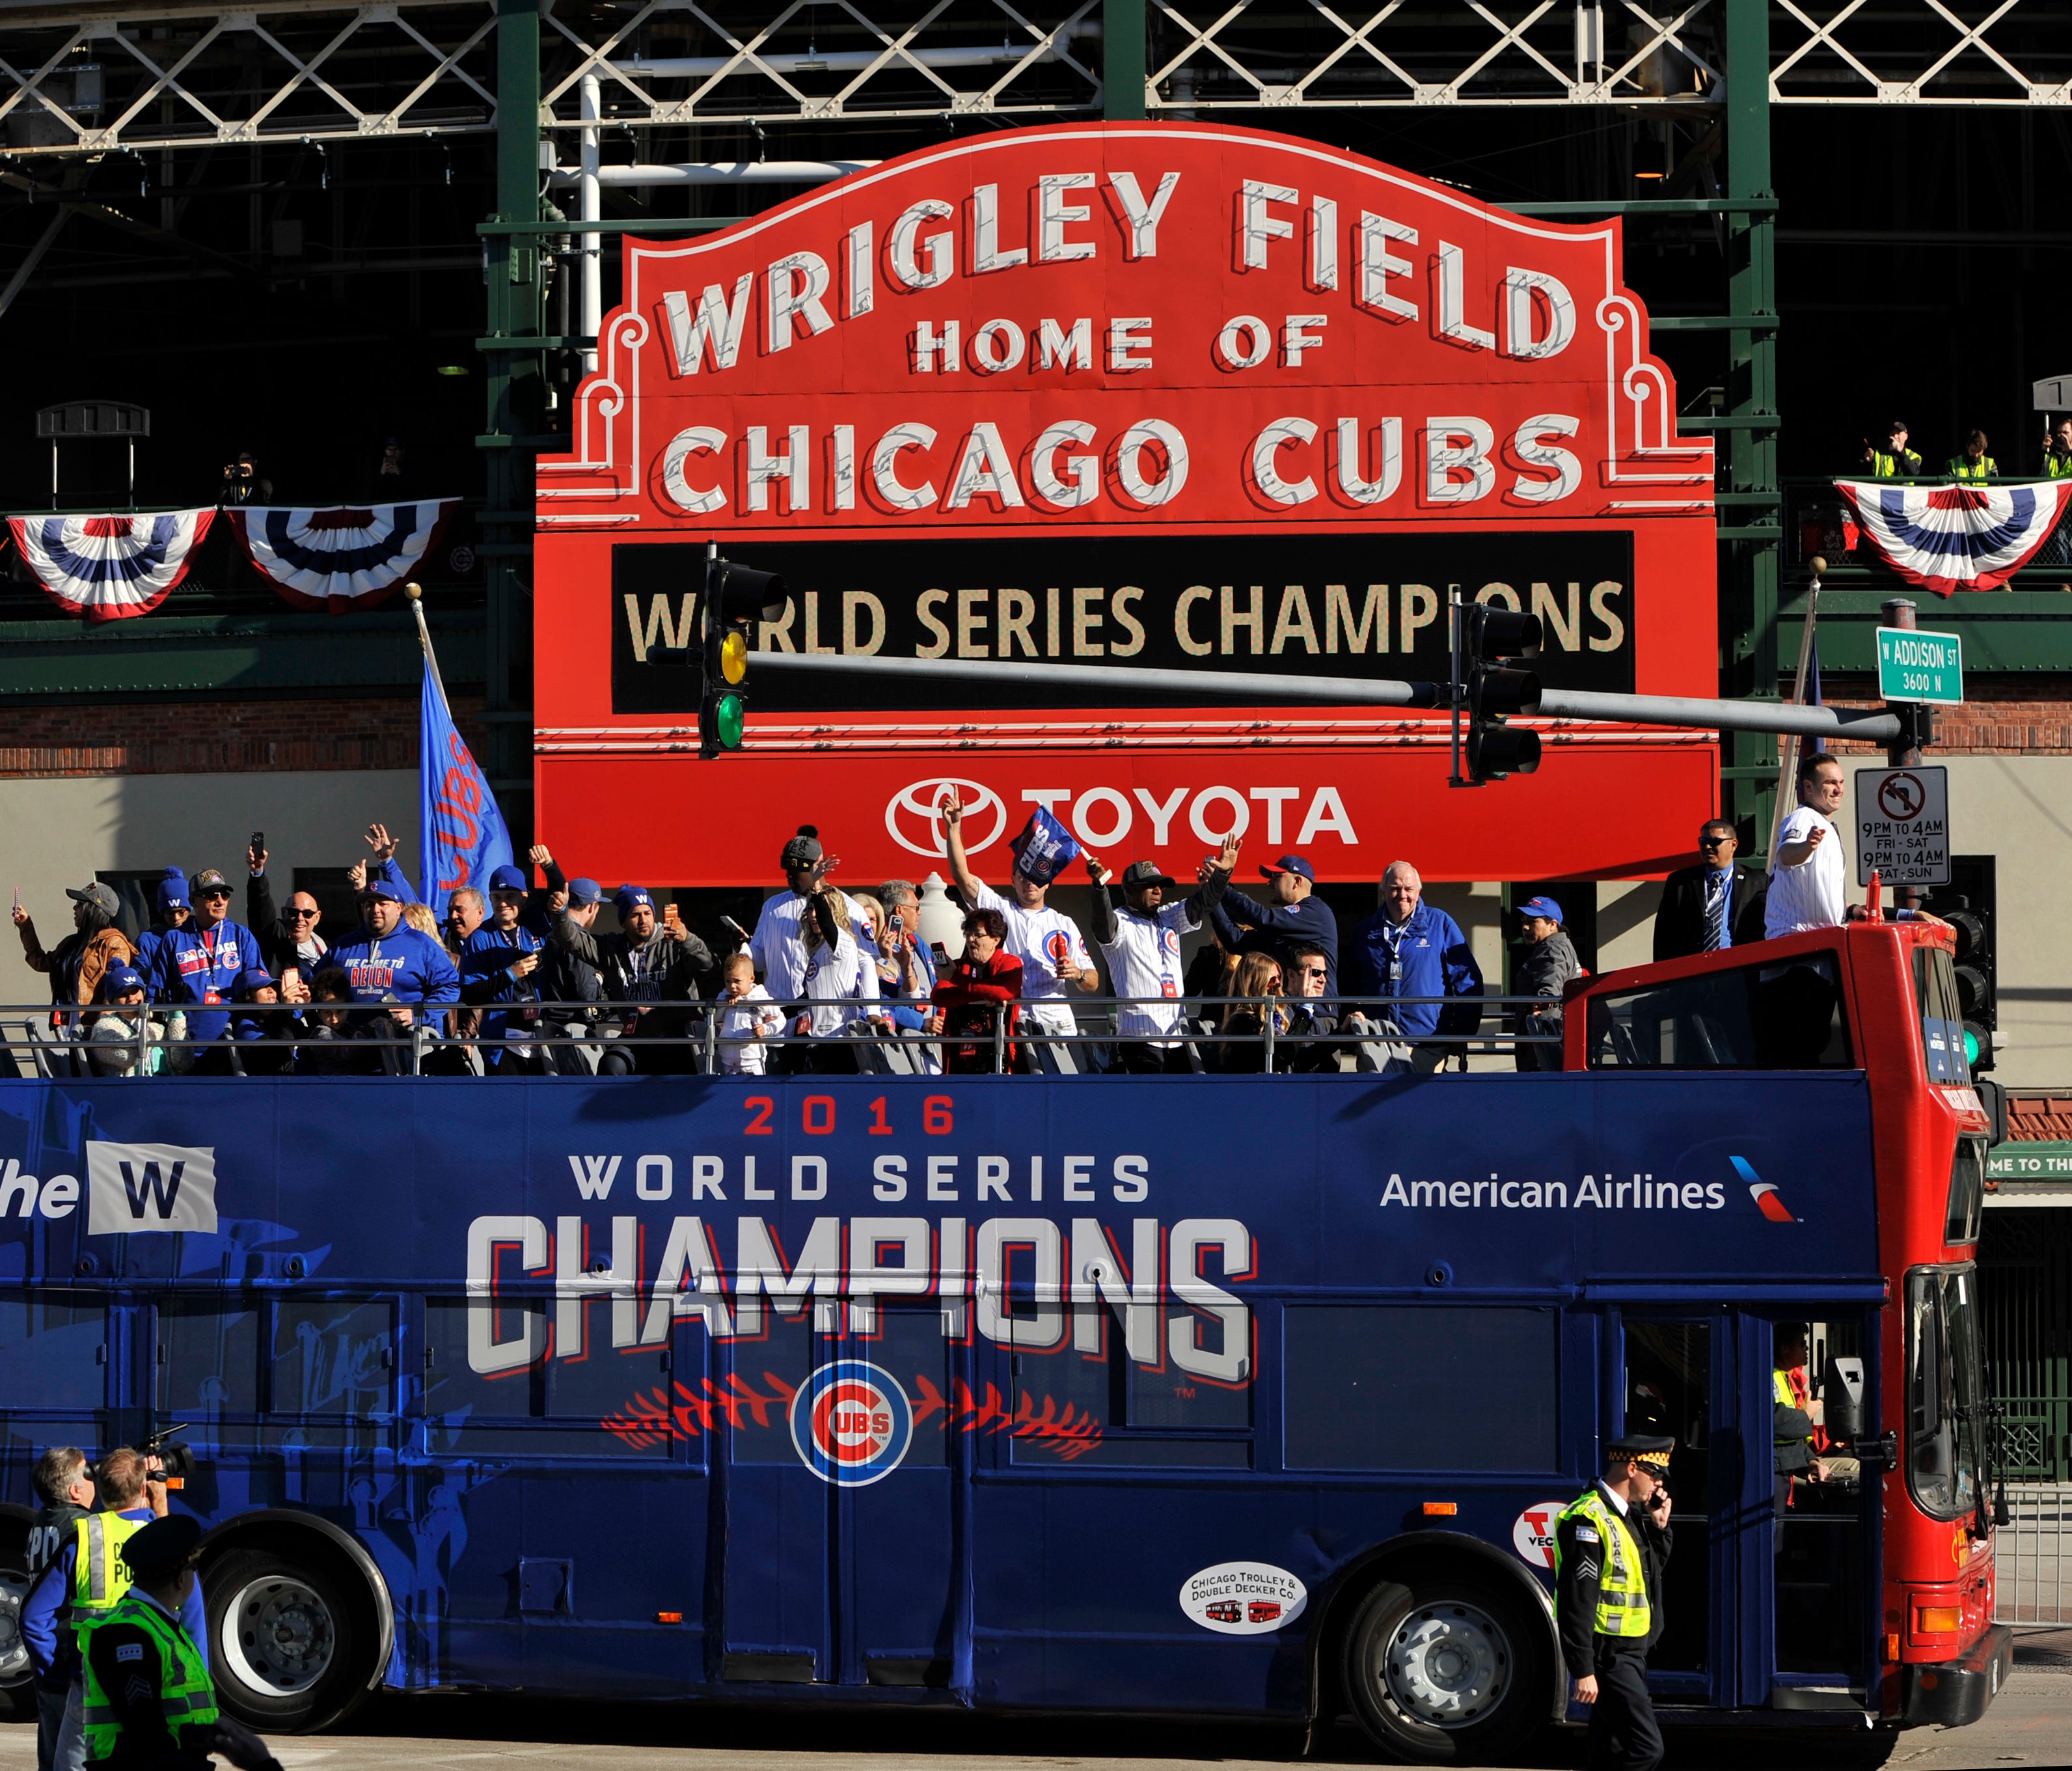 Wrigley Field already looked different with this message during the team's championship parade. Monday night, it will get a World Series banner.